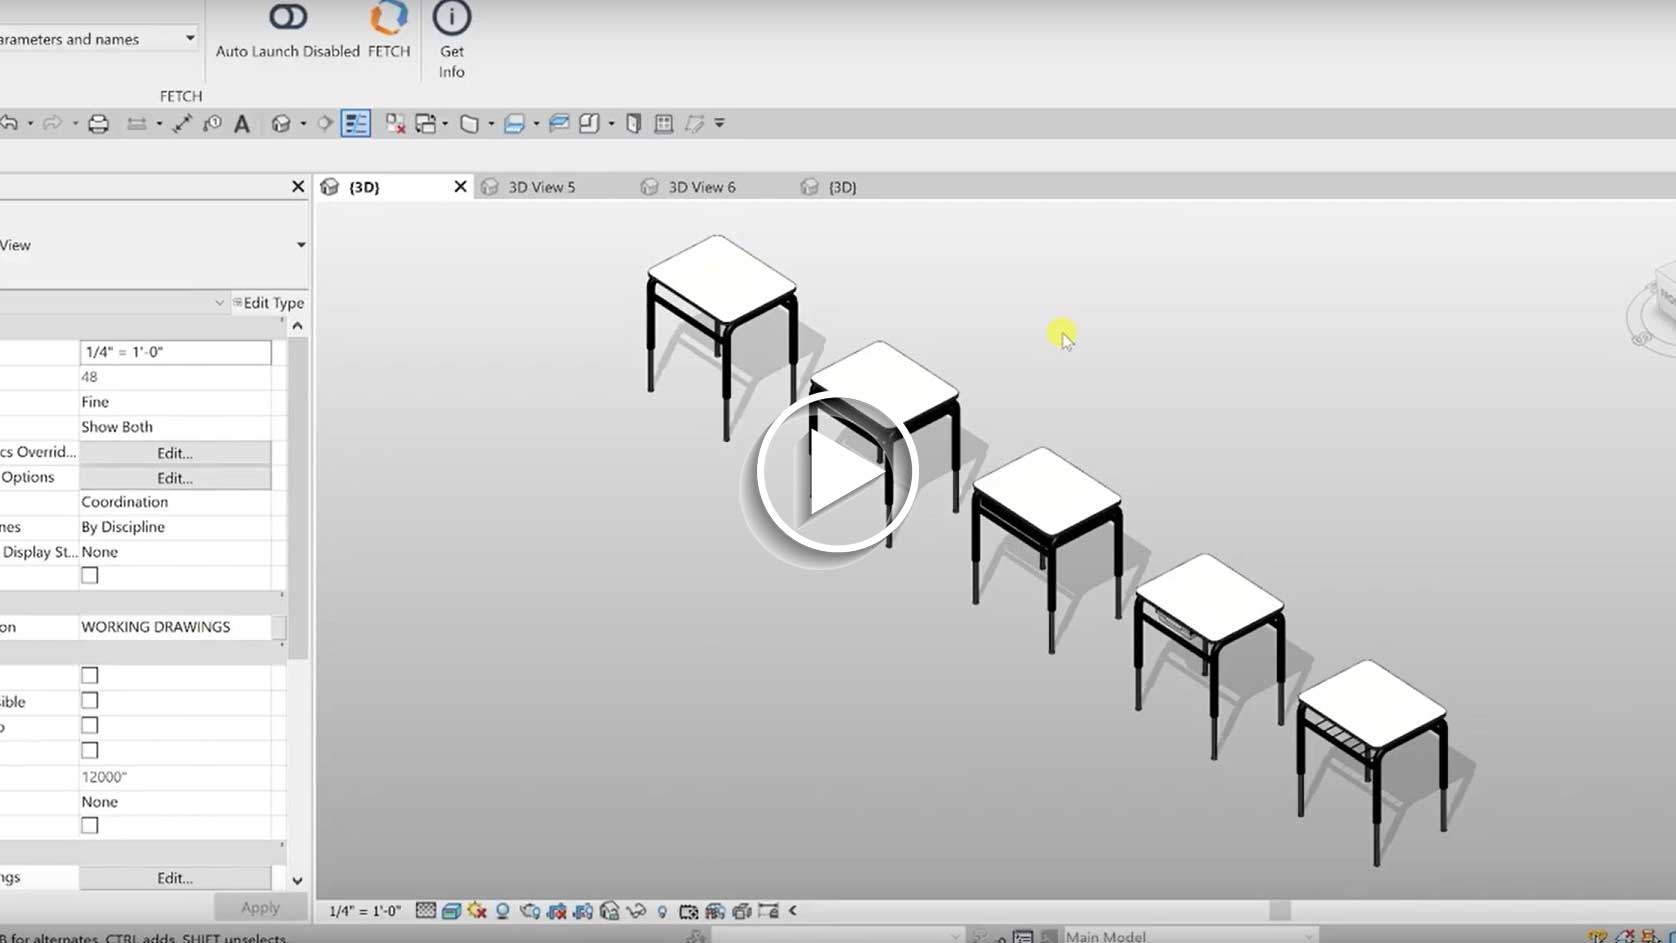 Student Desk for Classrooms or Library Revit Model